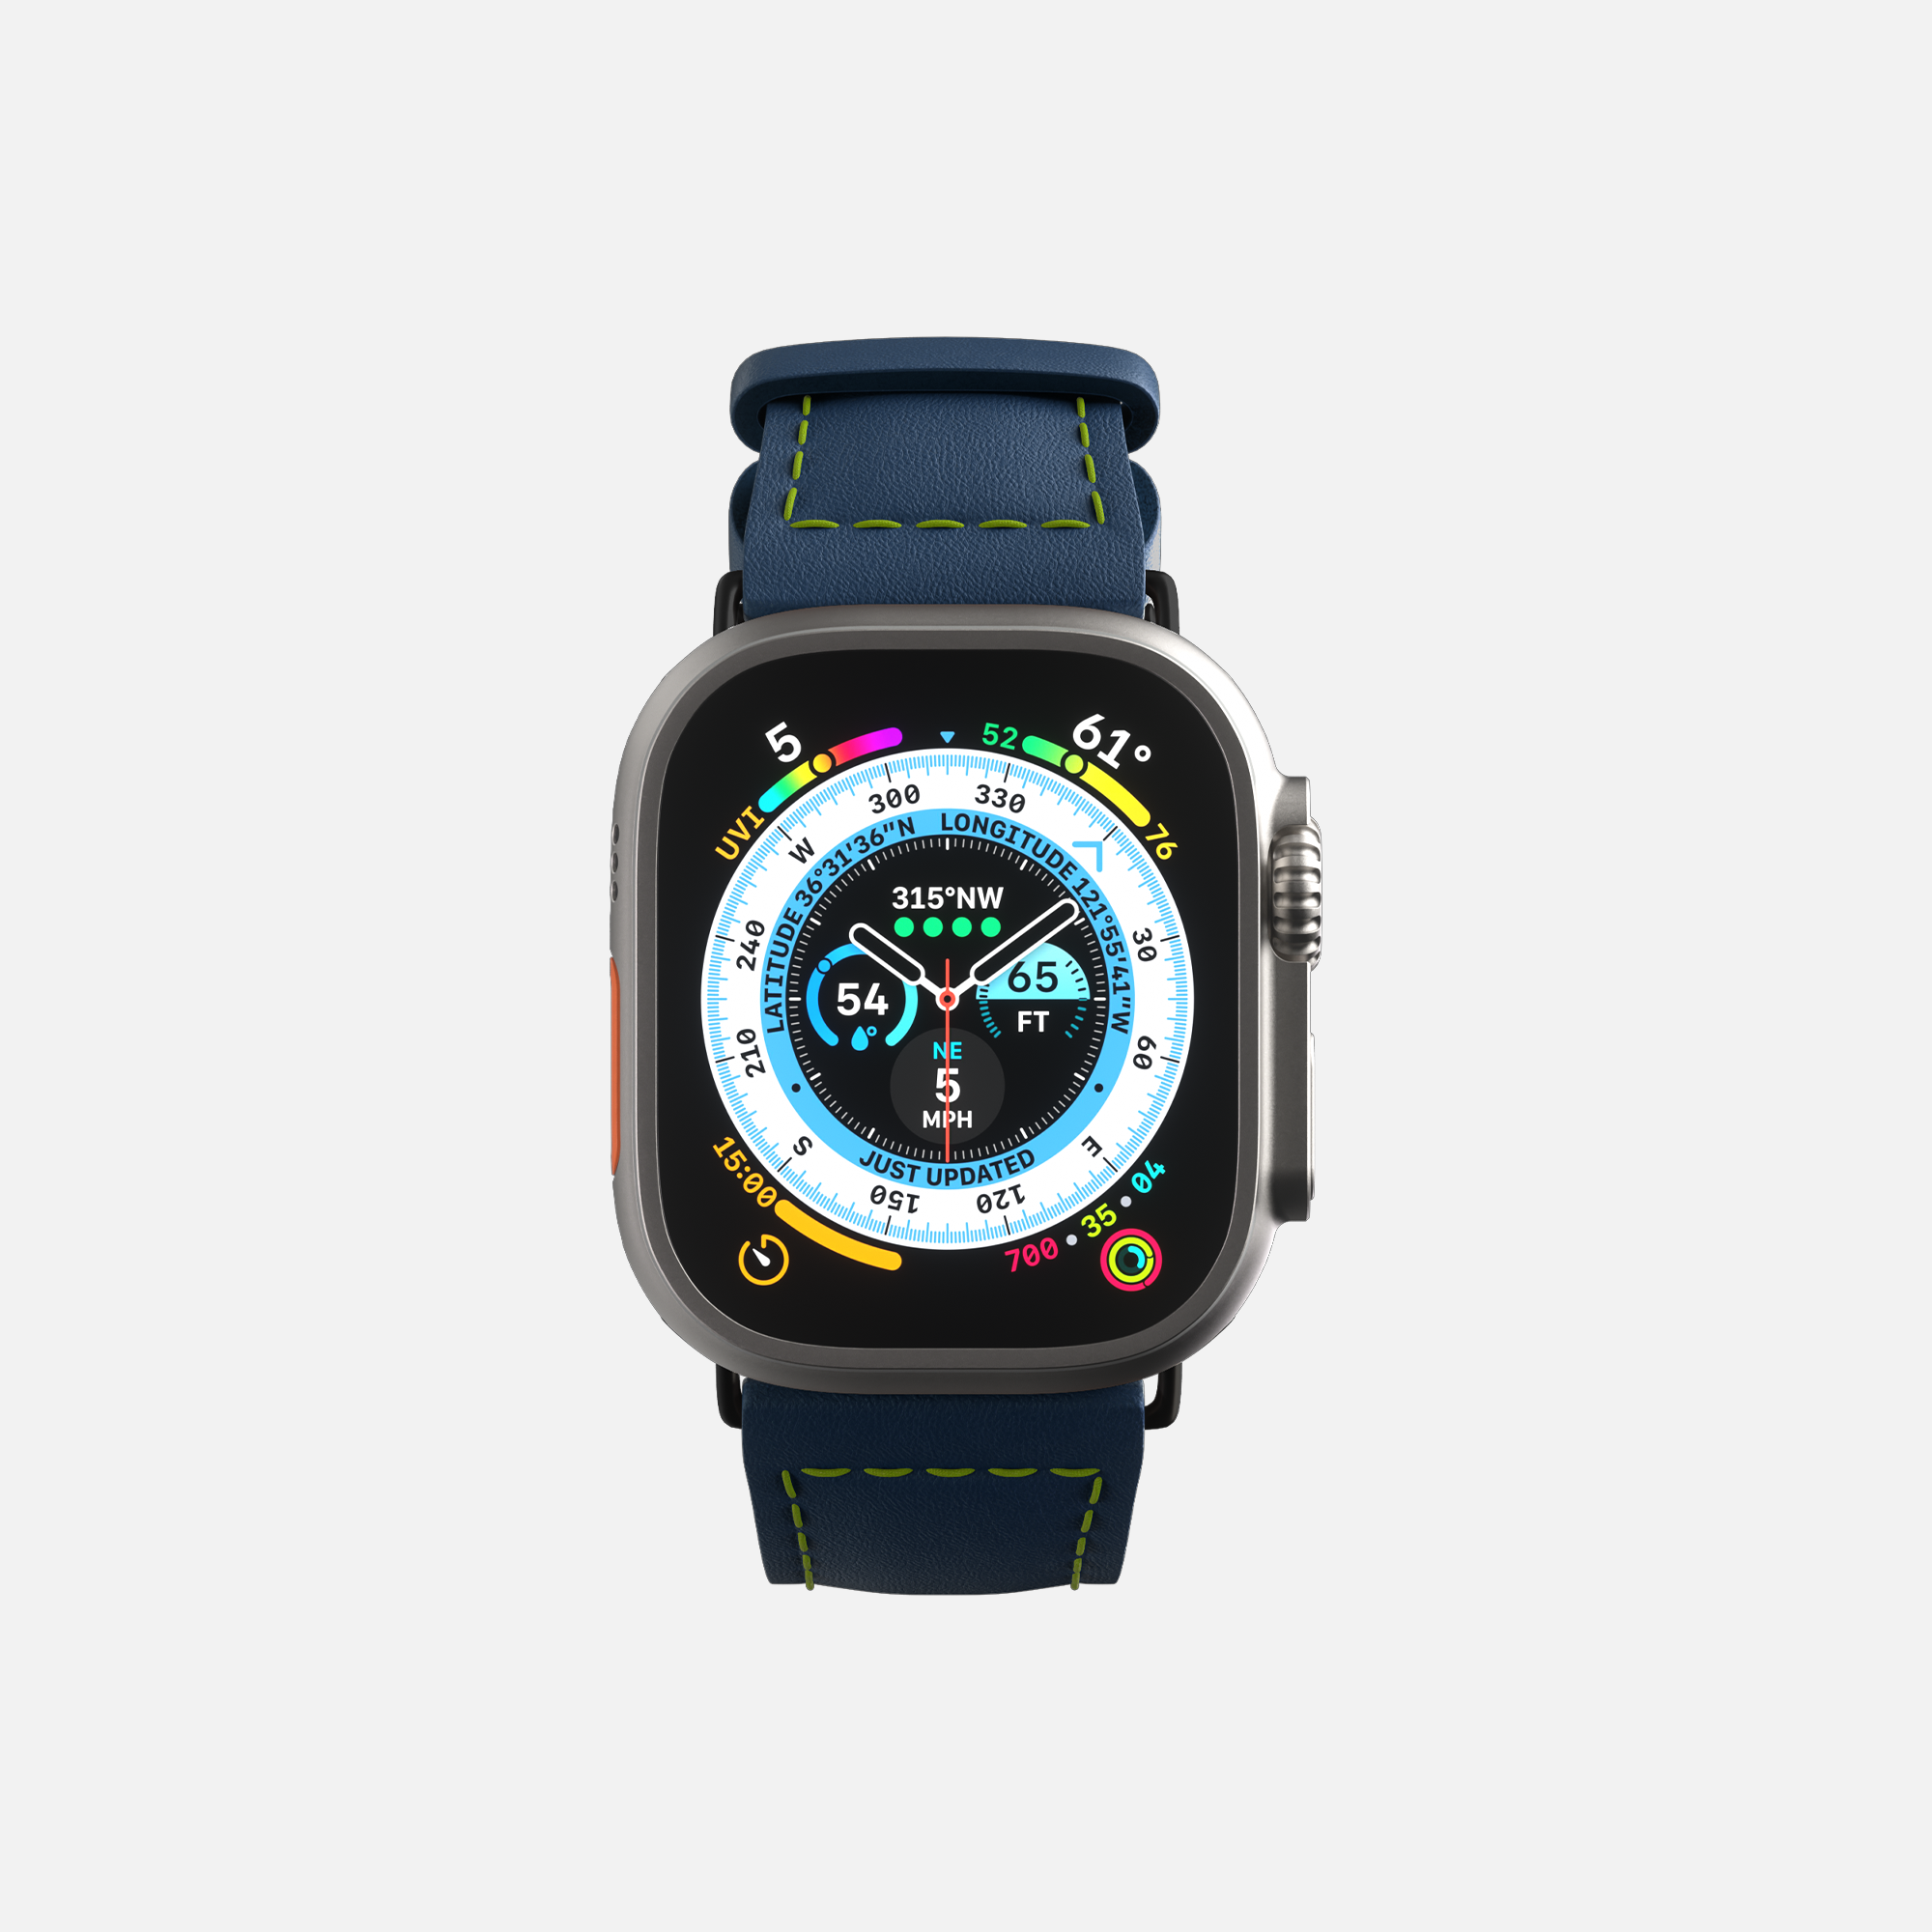 Apple Smartwatch with blue strap, navigation dial face displaying compass and coordinates, isolated on white.